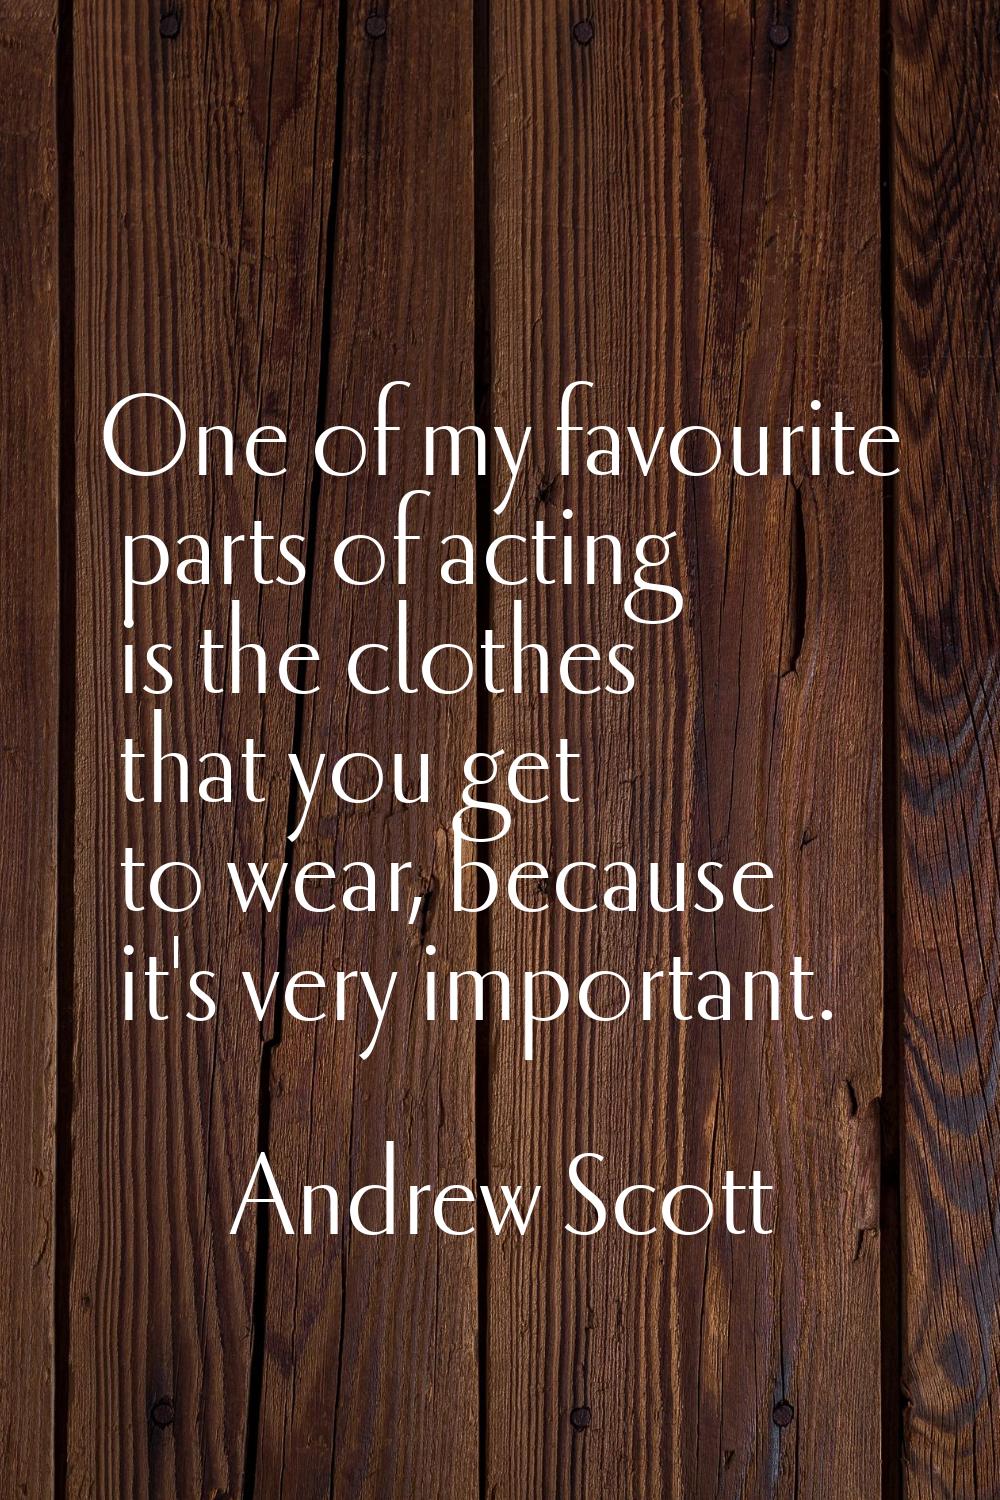 One of my favourite parts of acting is the clothes that you get to wear, because it's very importan